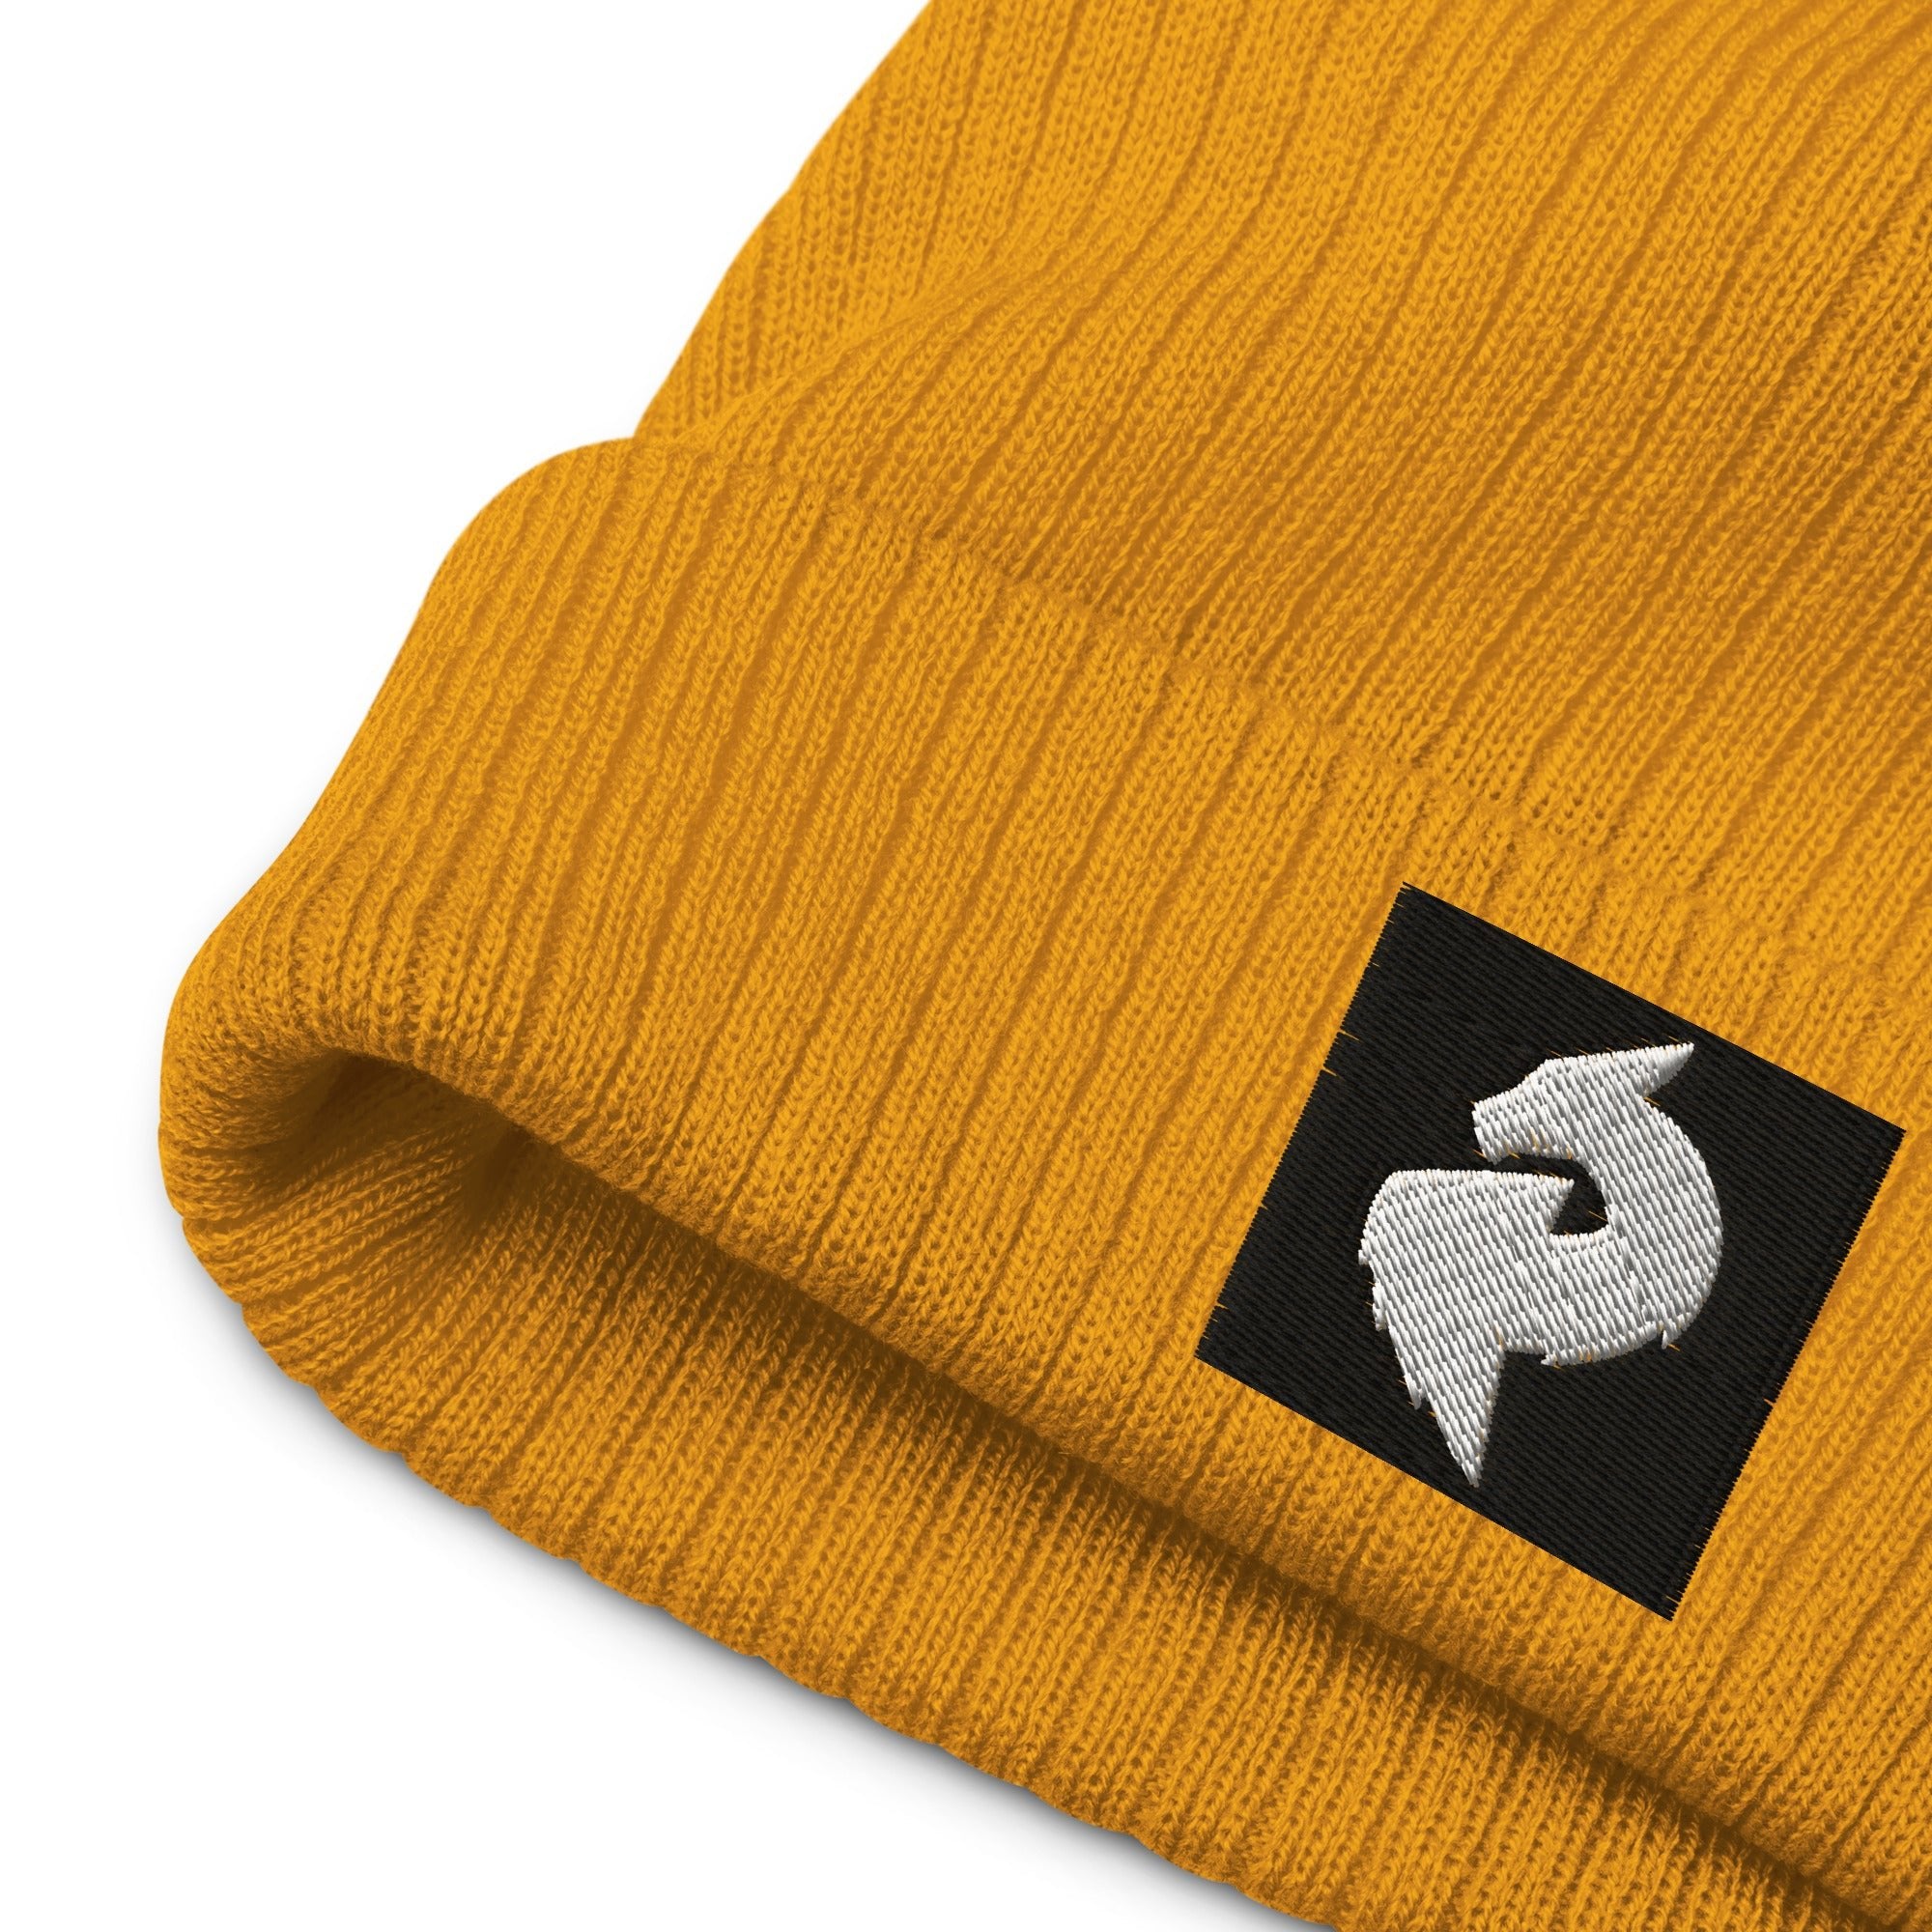 His or Hers Dragon Foxx™ Eco - Ribbed knit beanie - His or Hers Dragon Foxx™ Eco - Ribbed knit beanie - DRAGON FOXX™ - His or Hers Dragon Foxx™ Eco - Ribbed knit beanie - 2867494_13240 - Mustard - - Accessories - Acid Green Eco - Ribbed knit beanie - Beanie